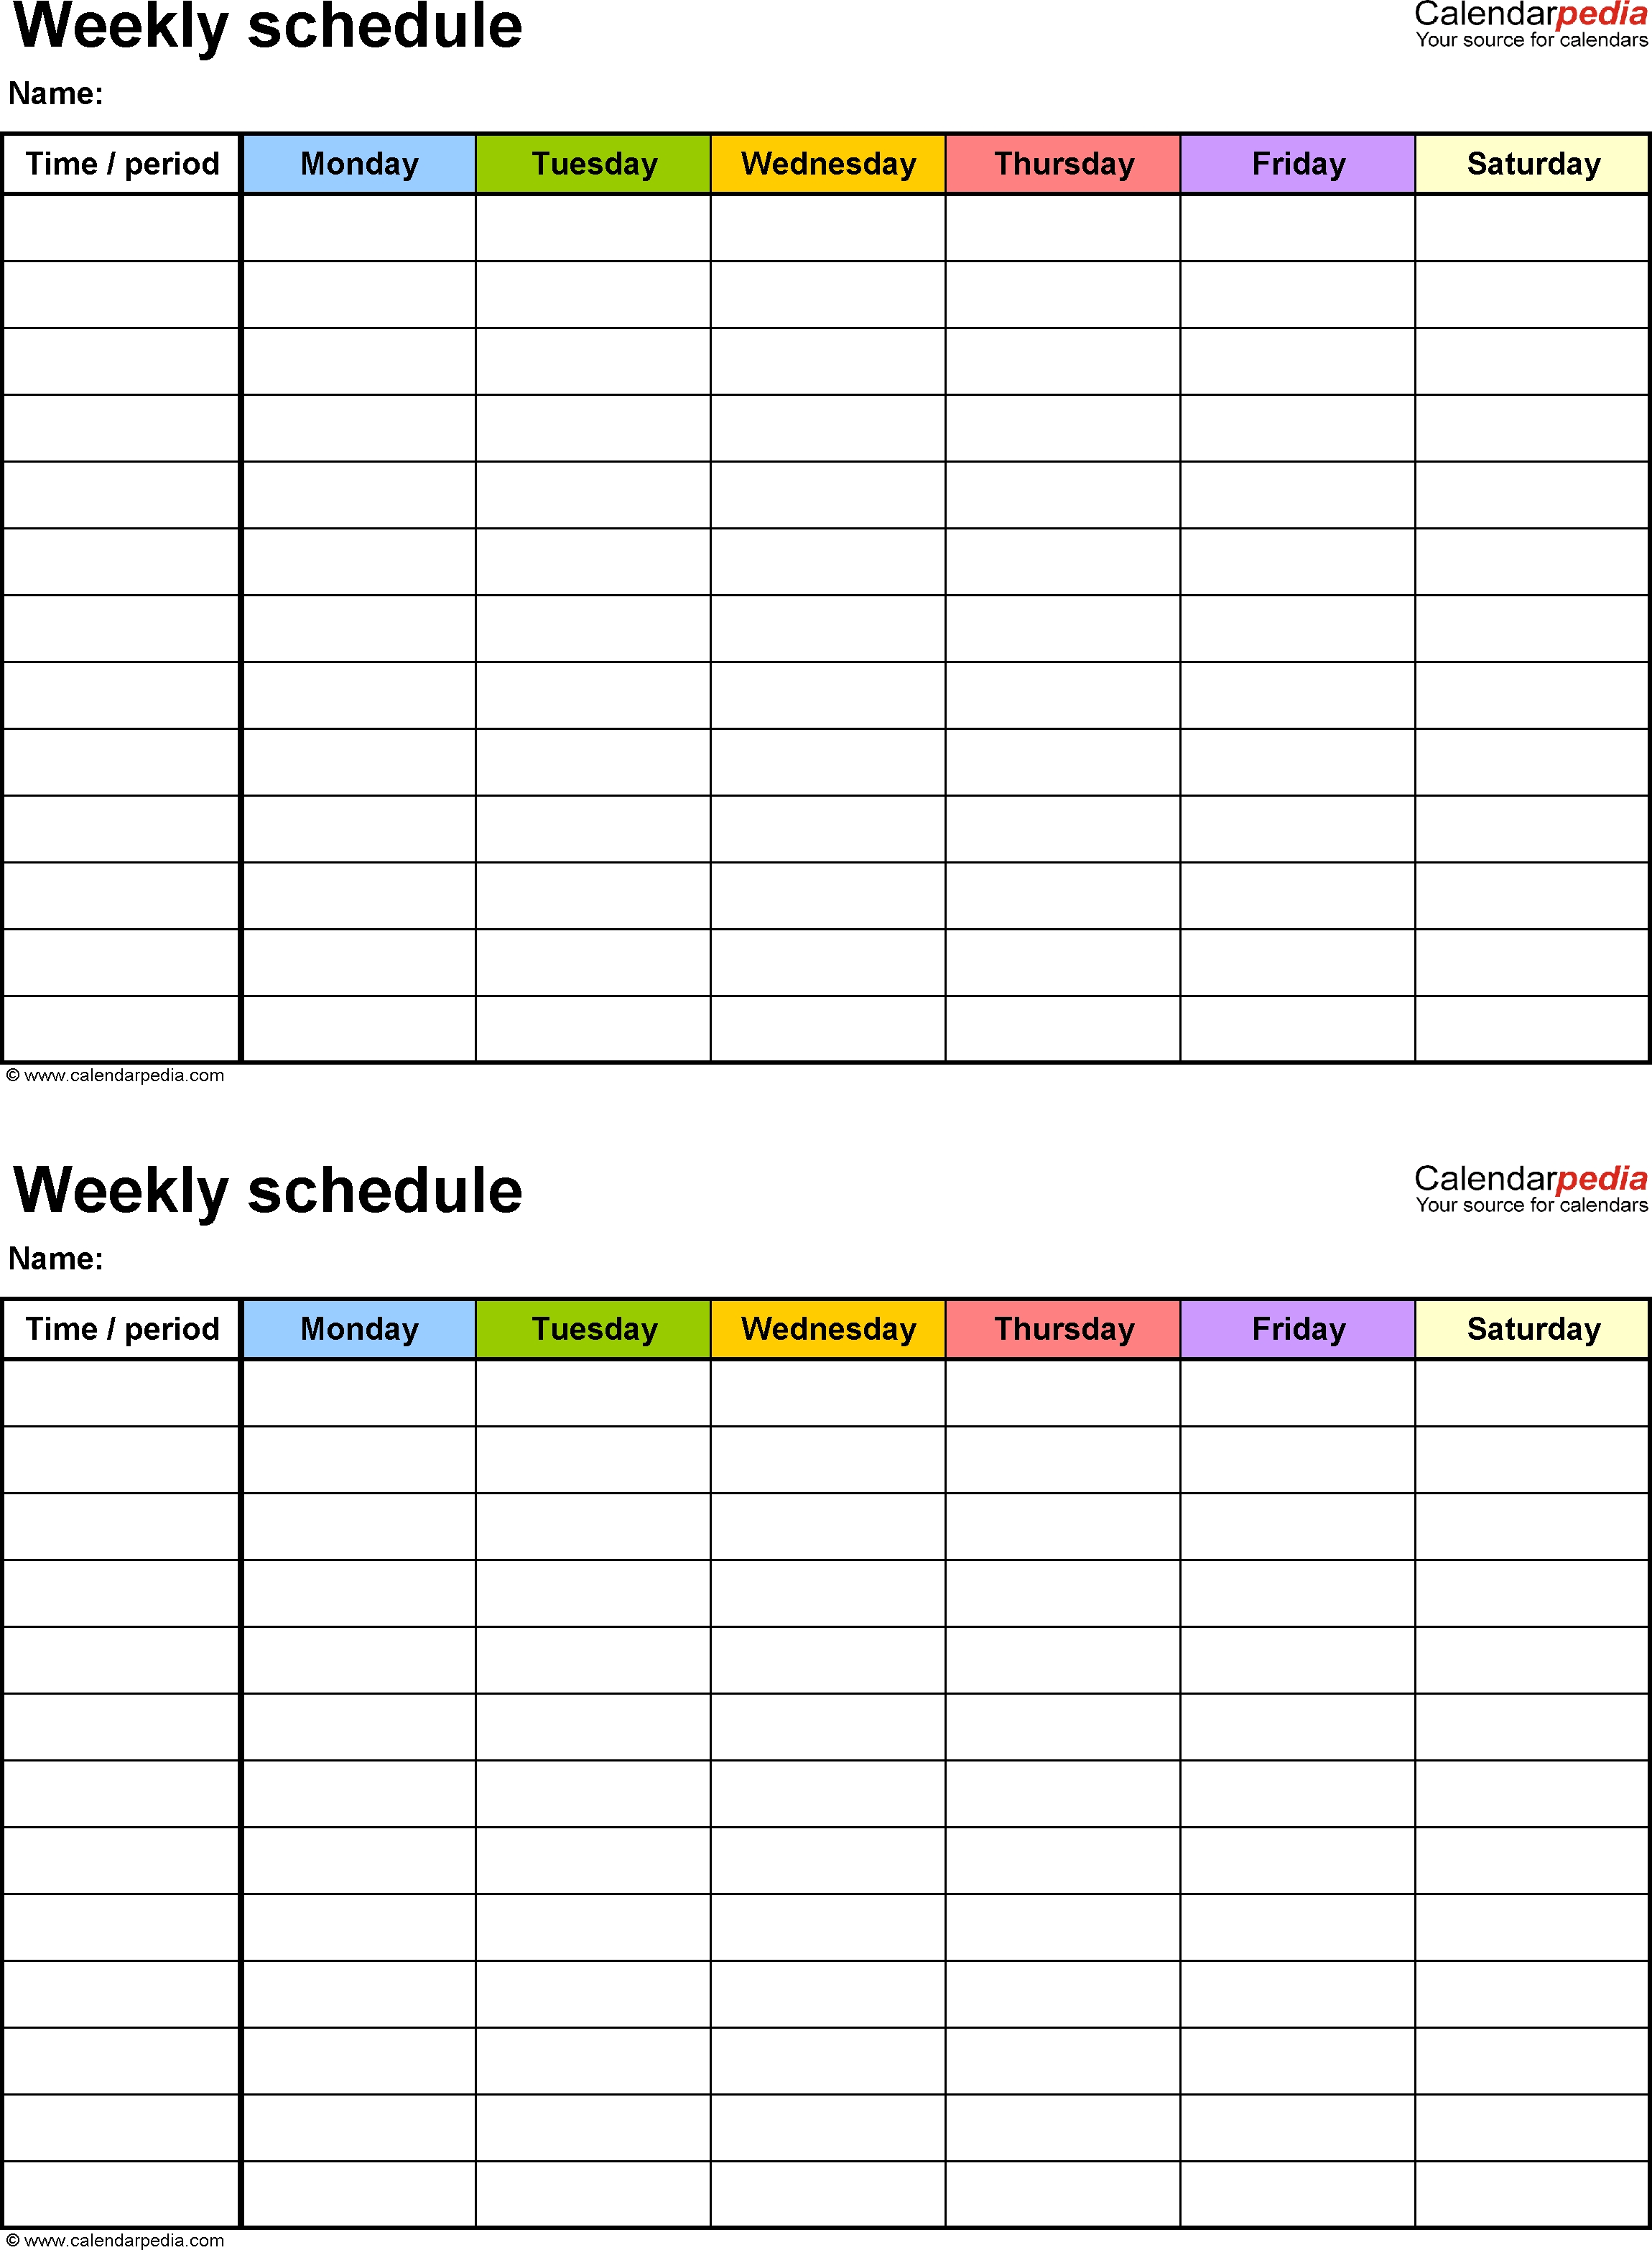 Free Weekly Schedule Templates For Excel - 18 Templates 6 Week Calendar Template Excel